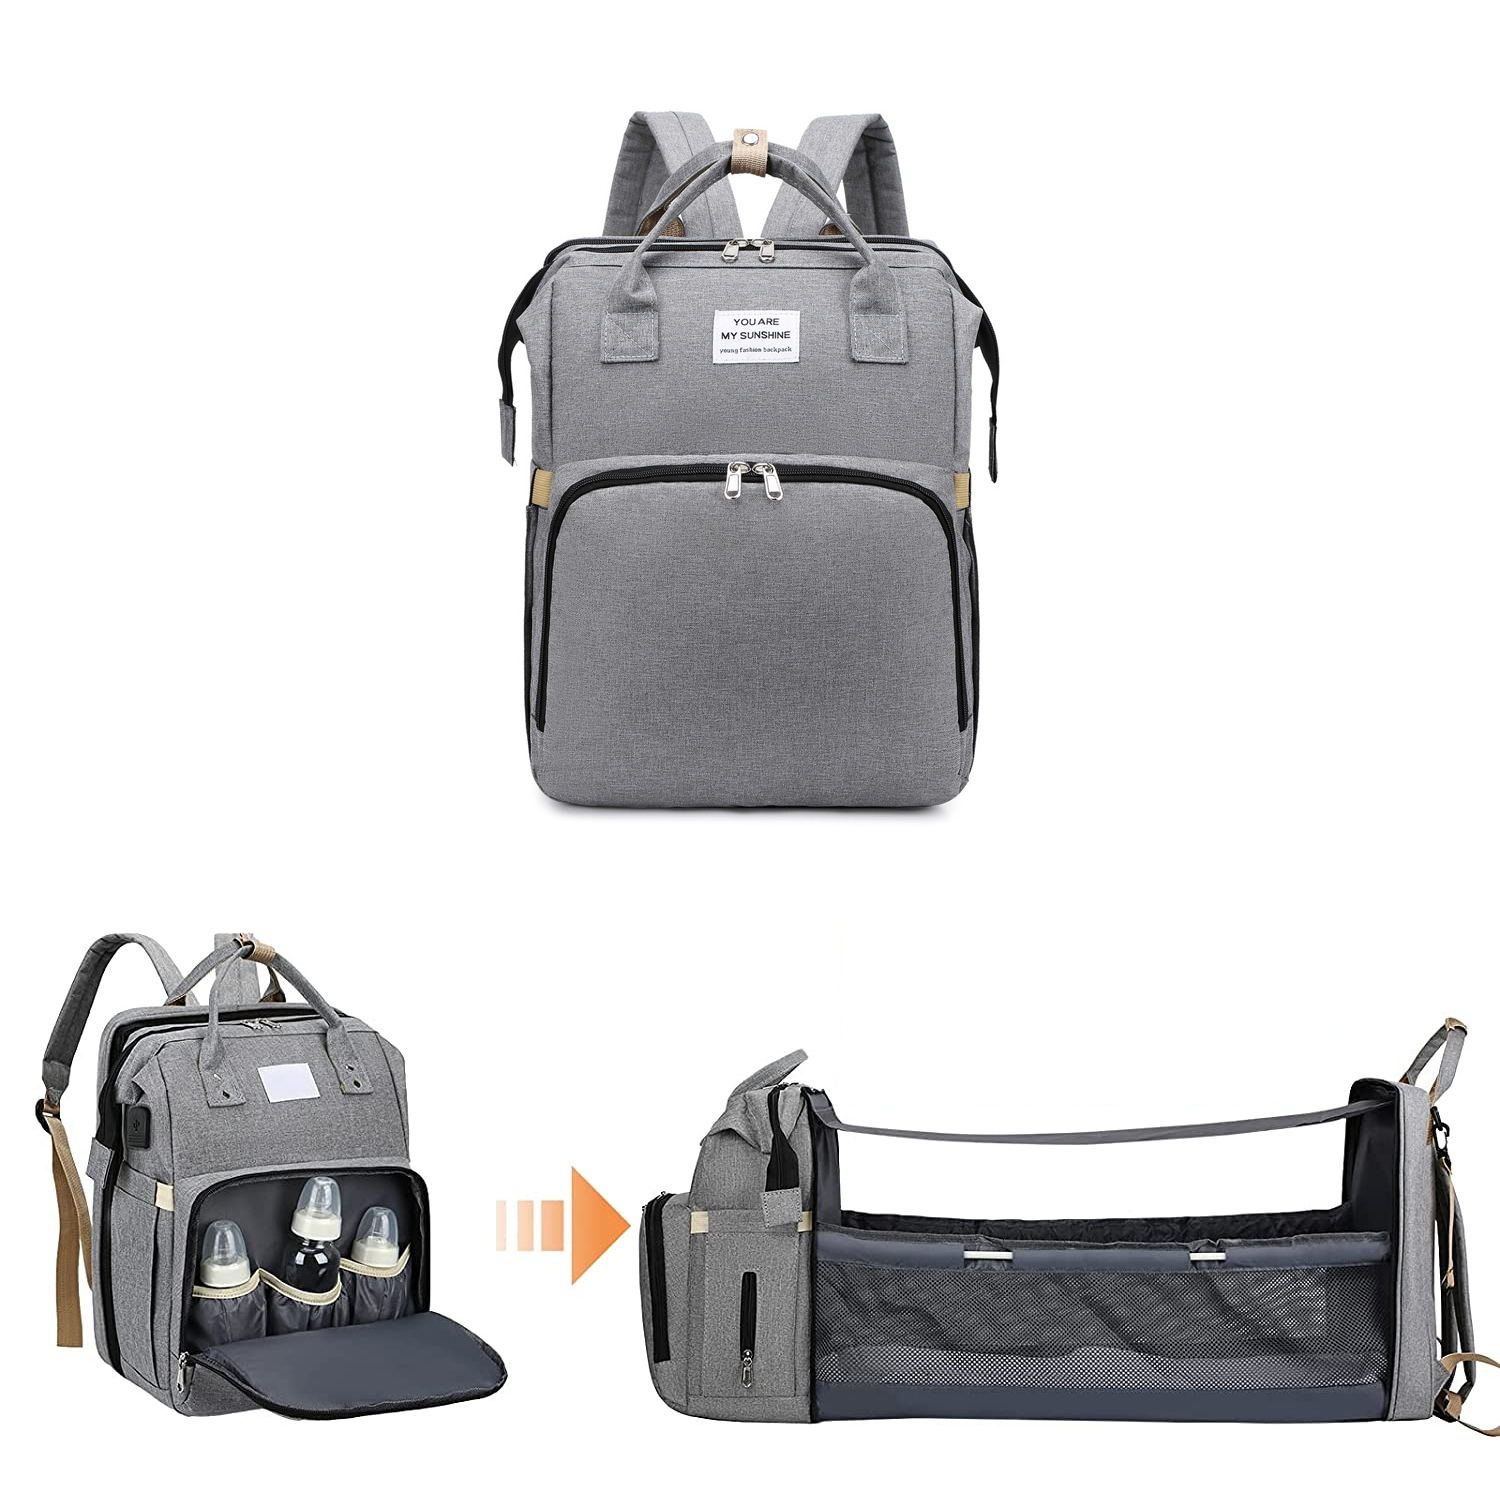 All-in-One Backpack